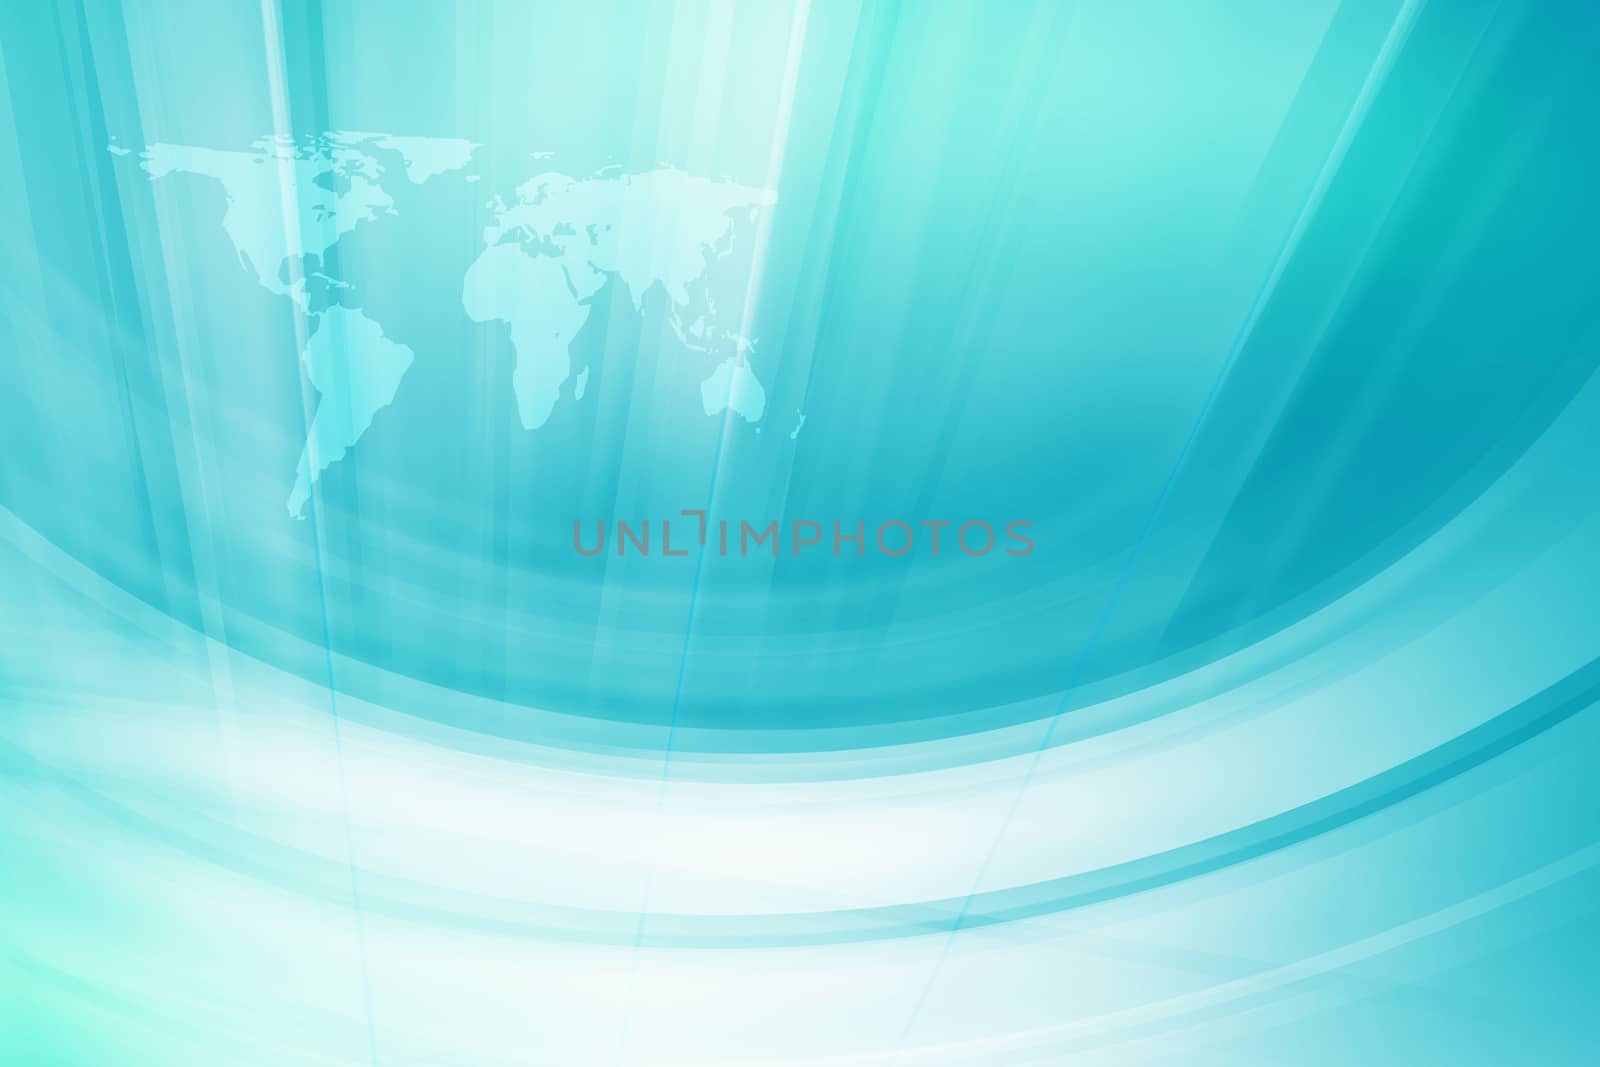 Abstract  Blue Theme Background whit White Curves and World Map.